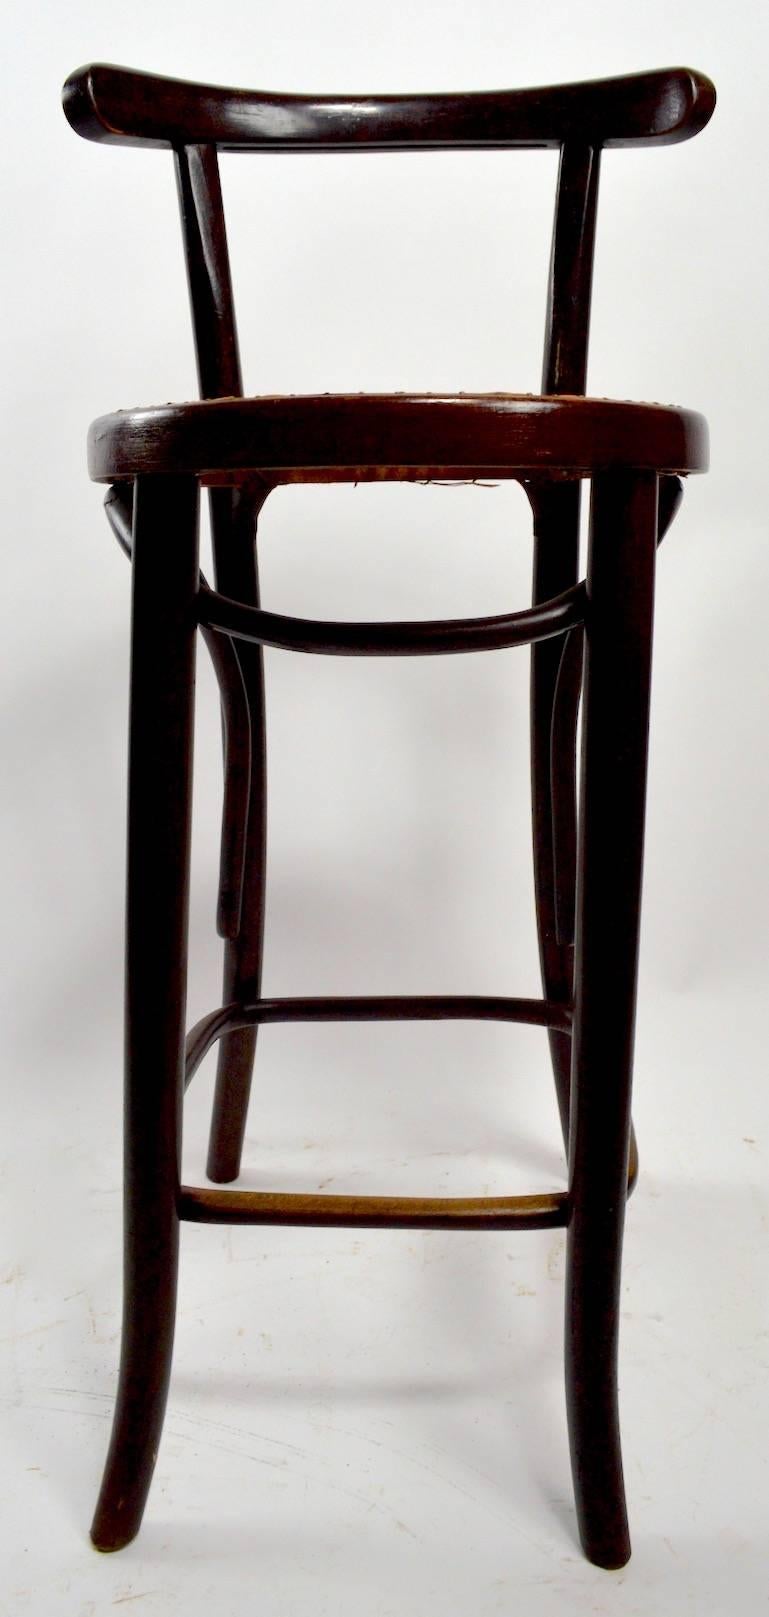 Pair of J J Kohn and Mundus bentwood stools made in Czechoslovakia, in the Vienna Secessionist style, after Thonet. These stools were originally found in Rileys Lake House, a notorious Saratoga NY speakeasy. Please view then other pair we have